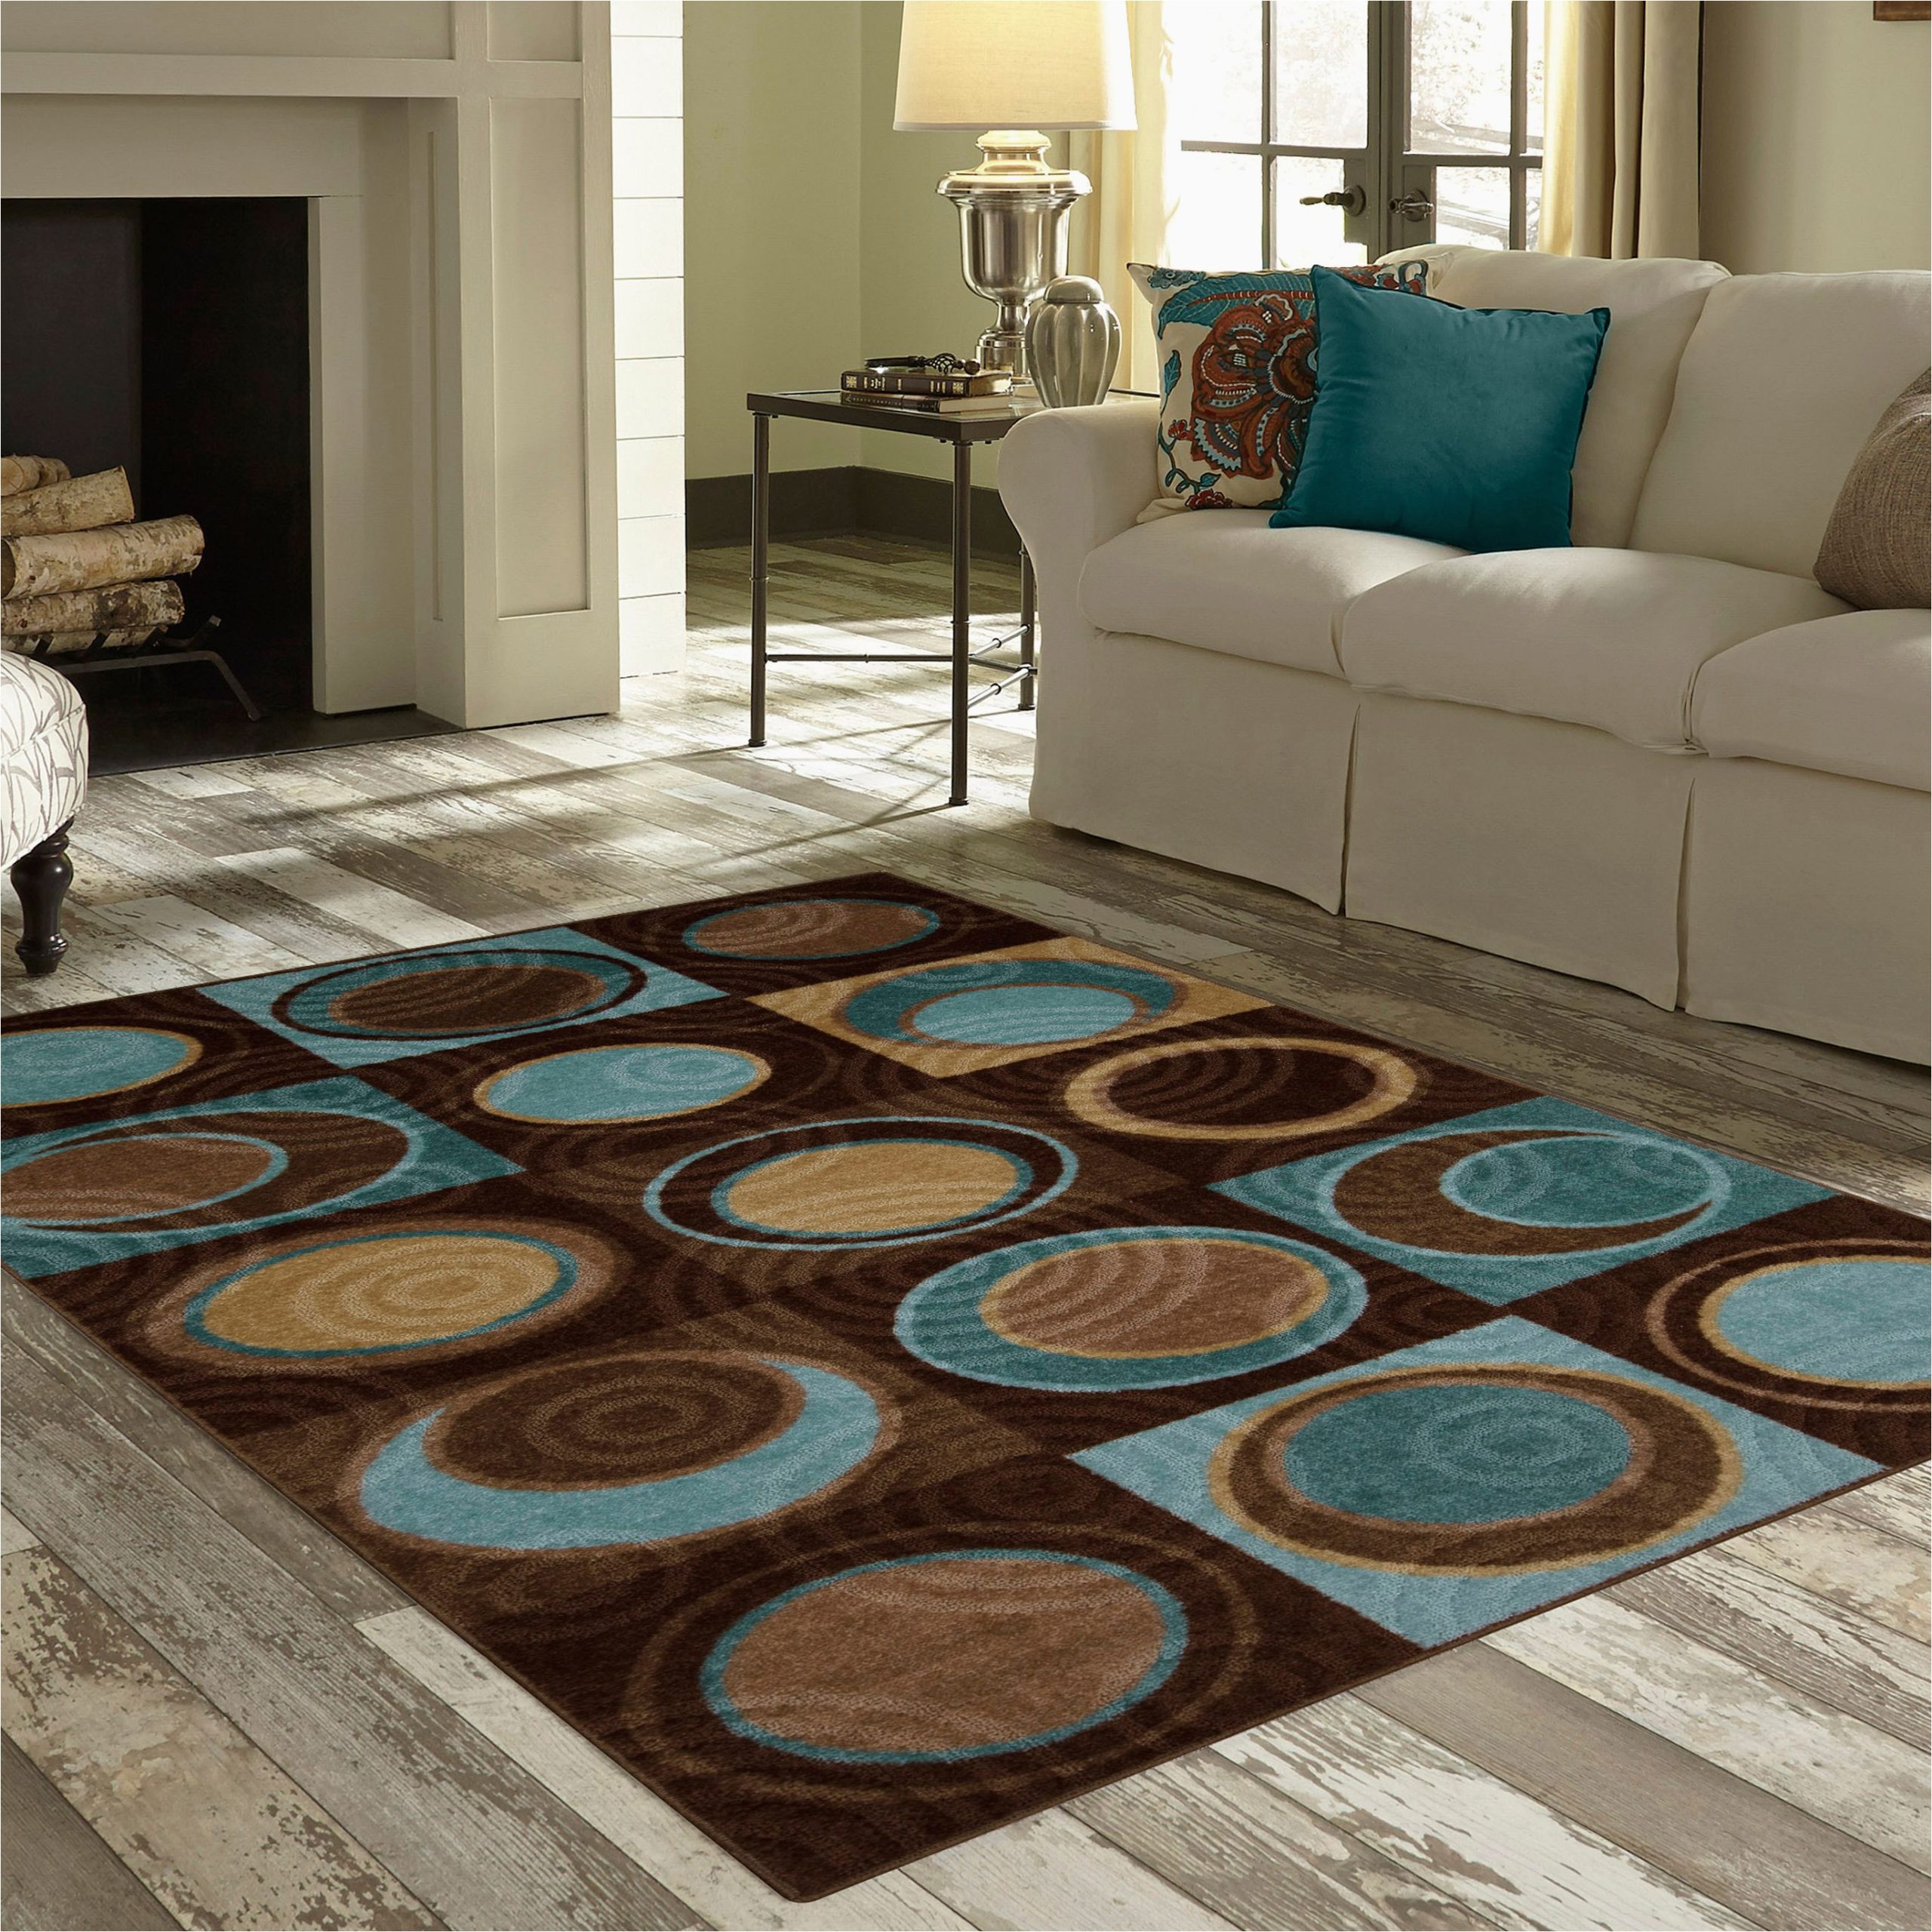 Better Homes and Gardens Circle Block area Rugs Better Homes & Gardens Circle Block Textured Print area Rug or …